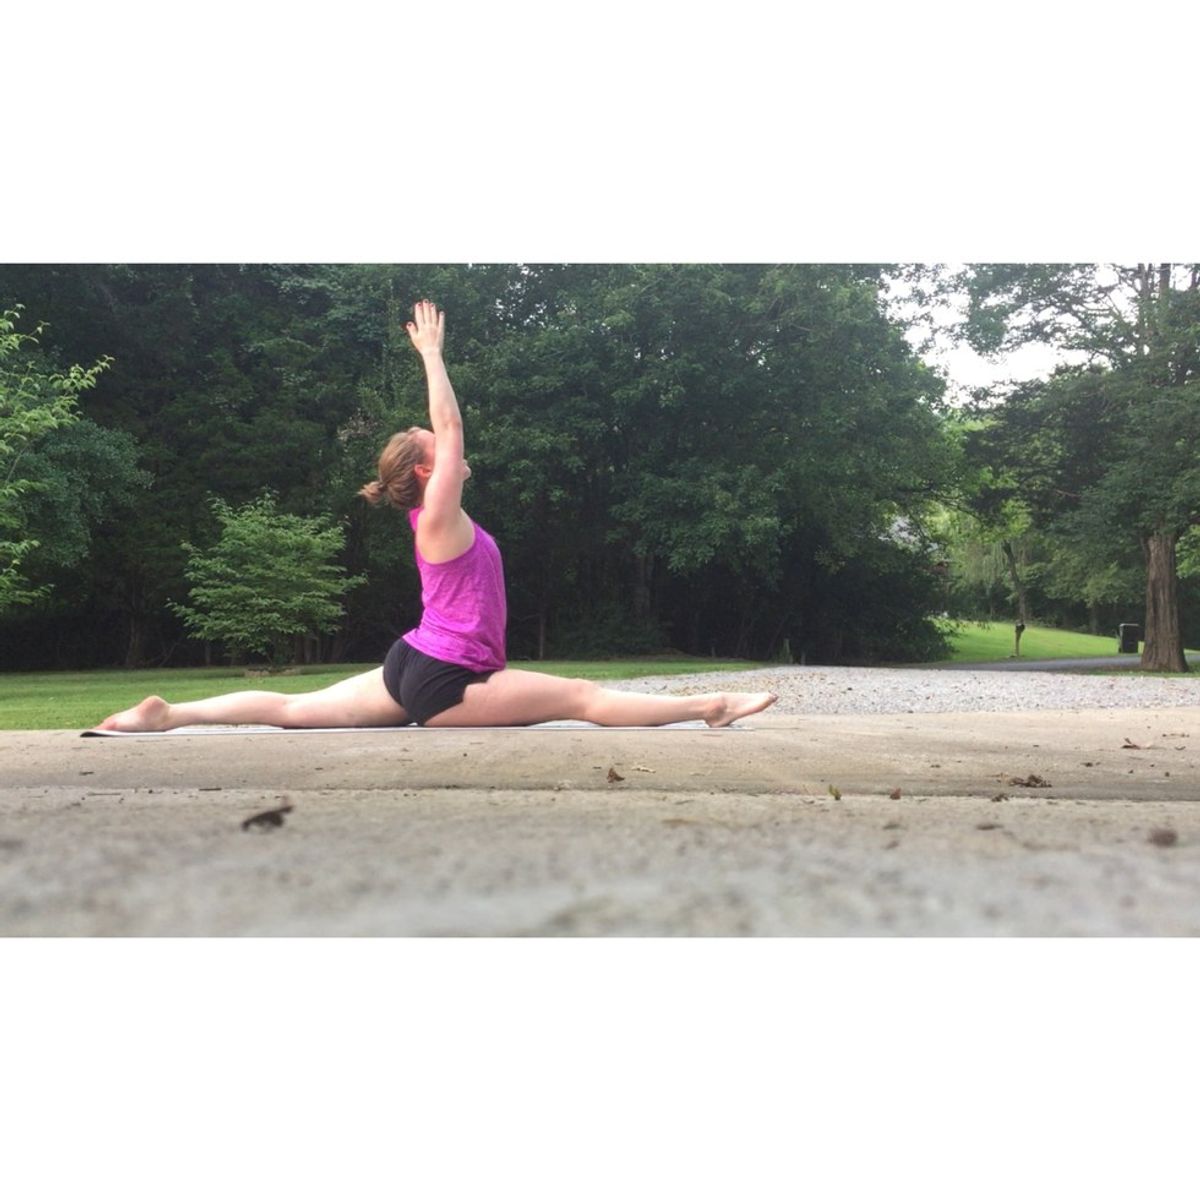 5 Things Practicing Yoga Has Taught Me